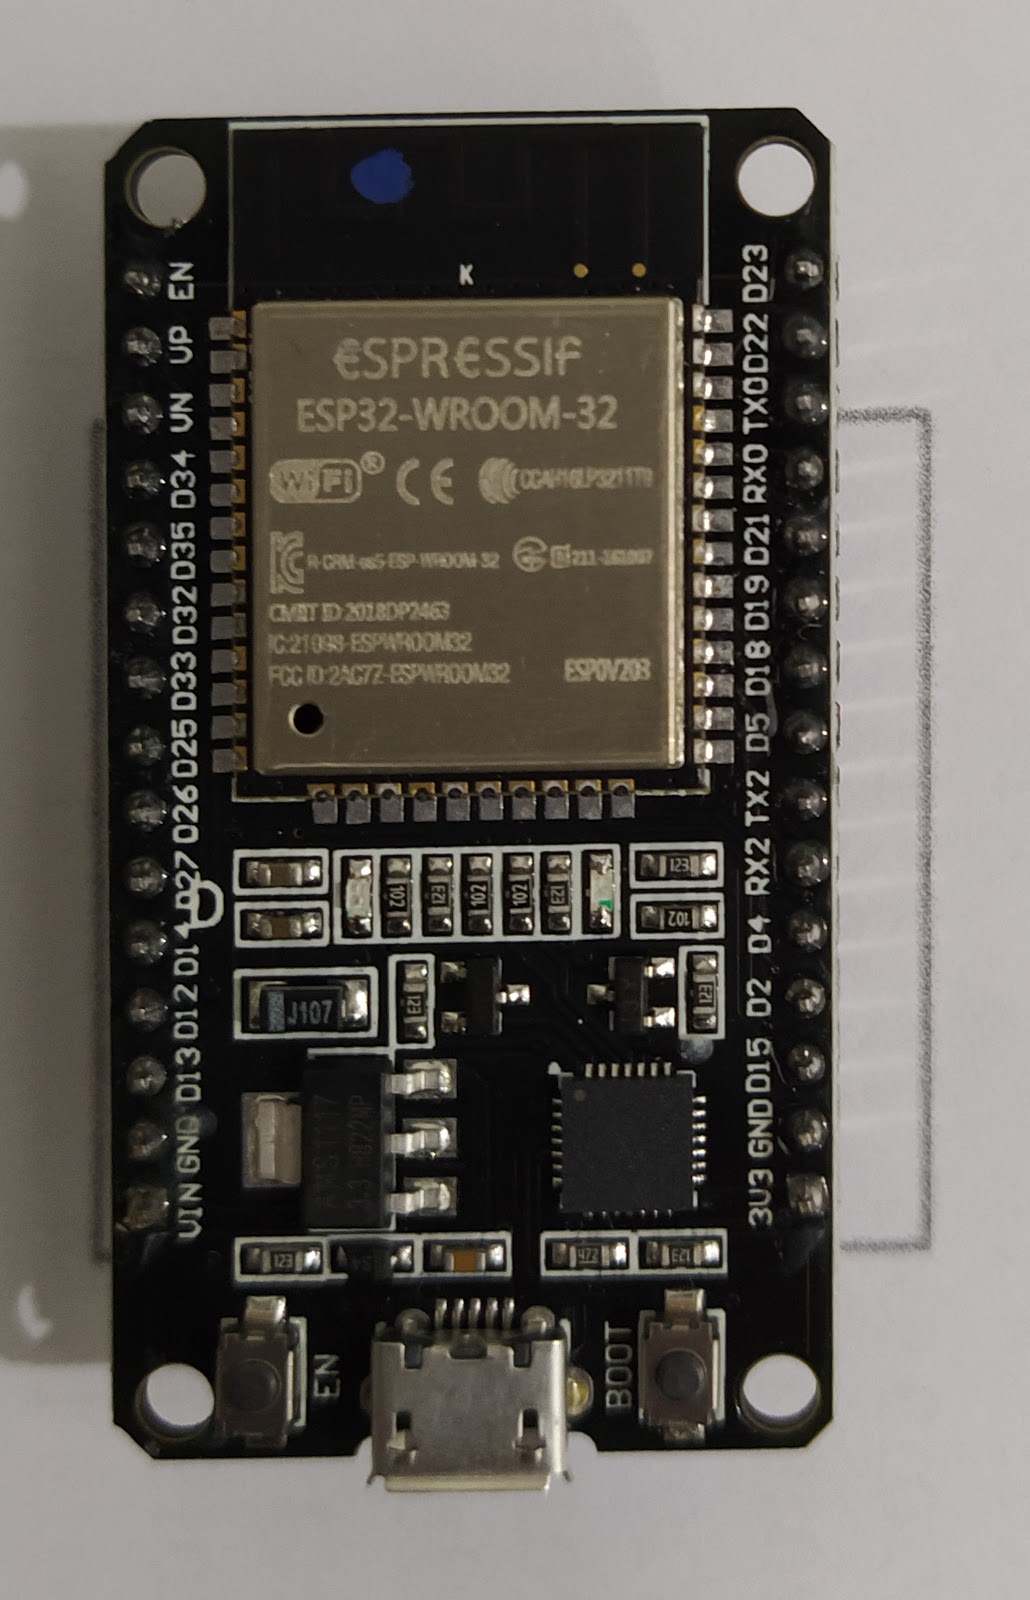 Introduction To Esp32 Hardware Hassins Workspace Firmware